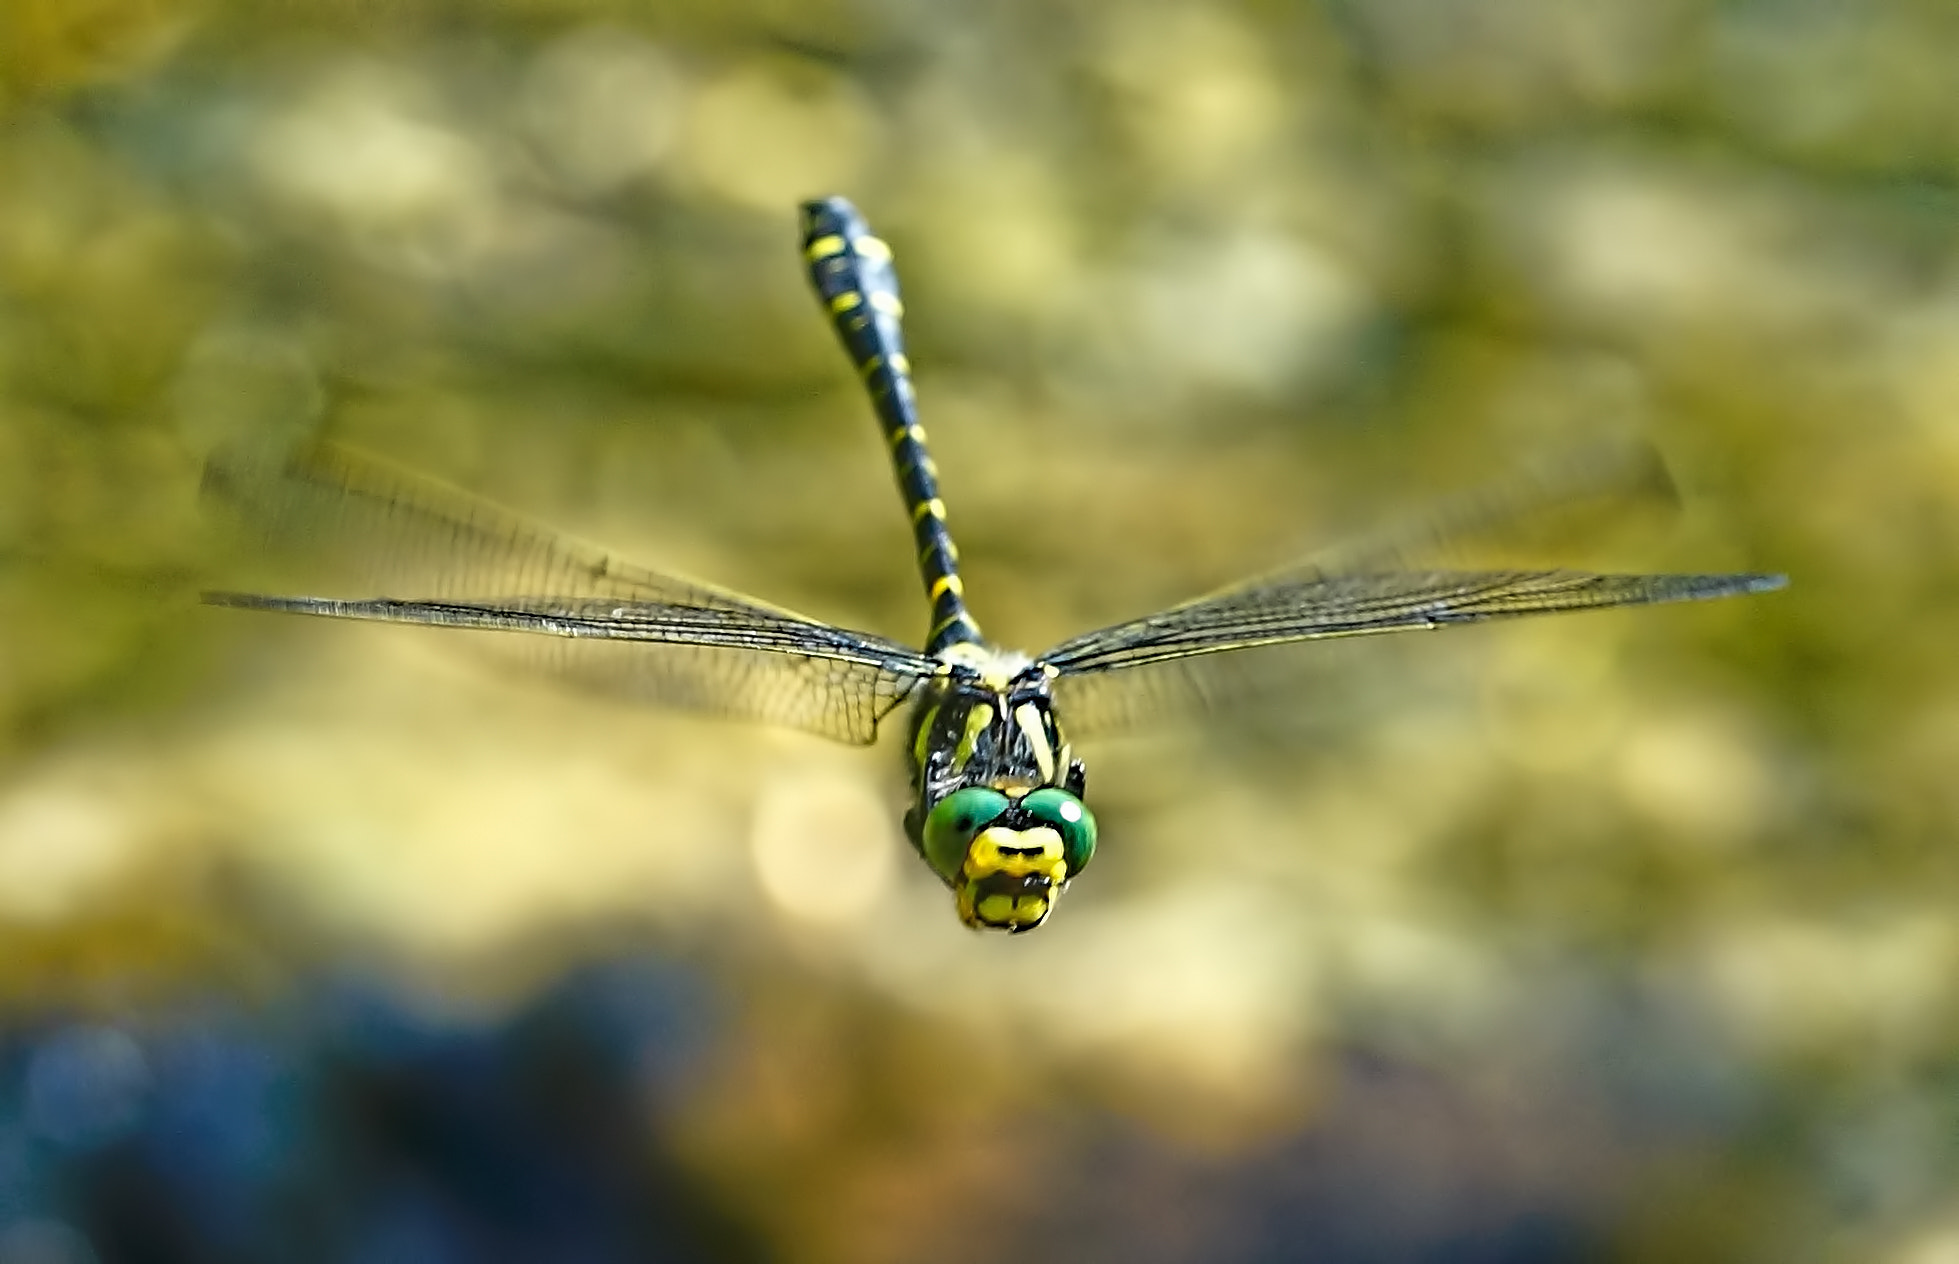 150mm F2.8 sample photo. Golden ringed dragonfly photography